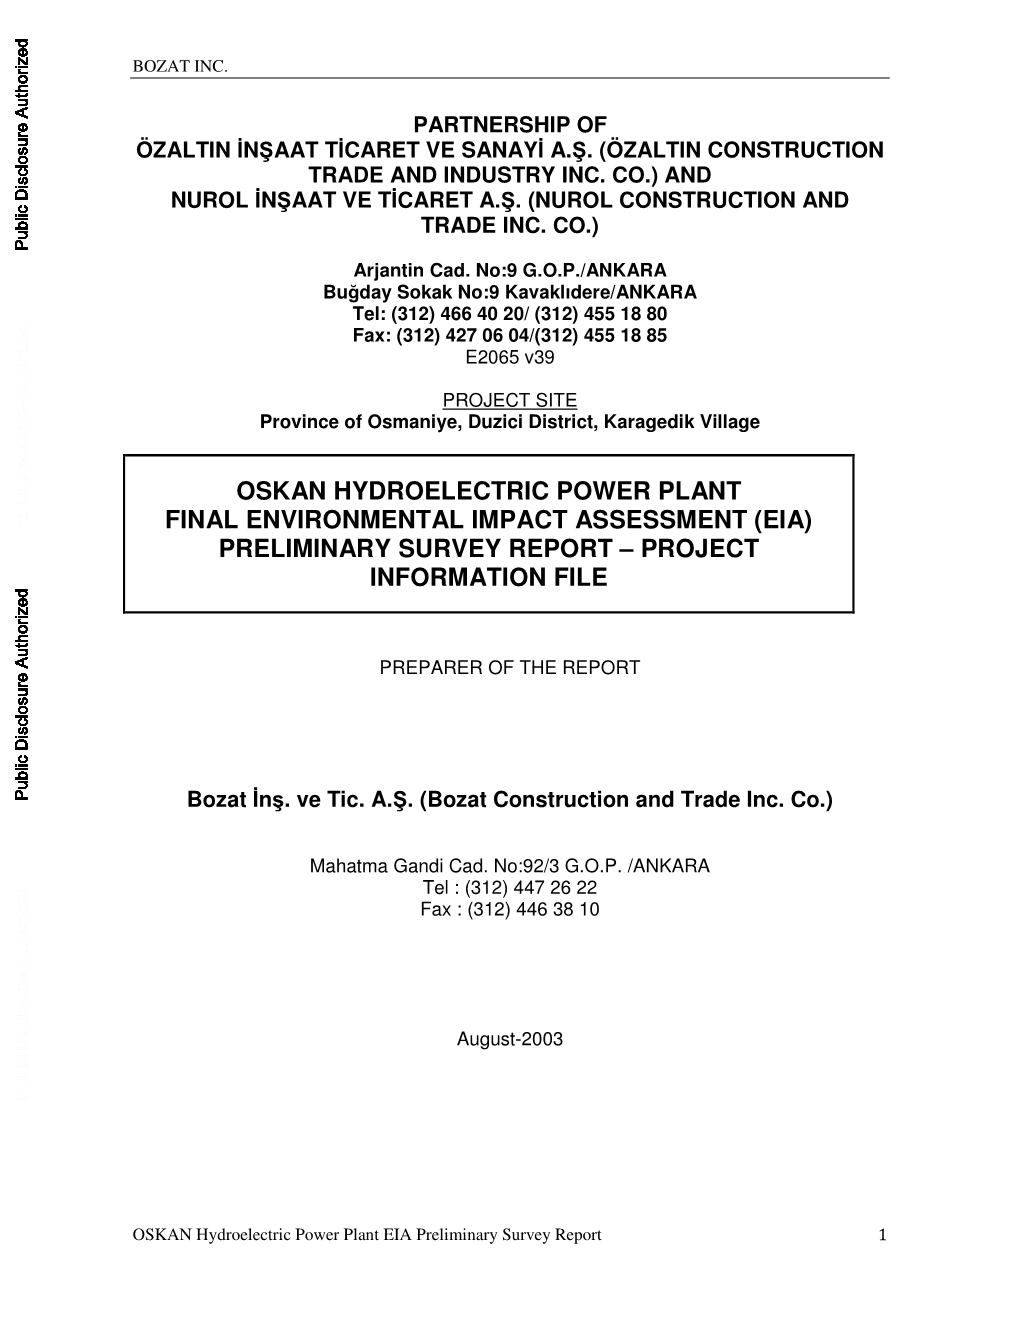 OSKAN HYDROELECTRIC POWER PLANT FINAL ENVIRONMENTAL IMPACT ASSESSMENT (EIA) Public Disclosure Authorized PRELIMINARY SURVEY REPORT – PROJECT INFORMATION FILE